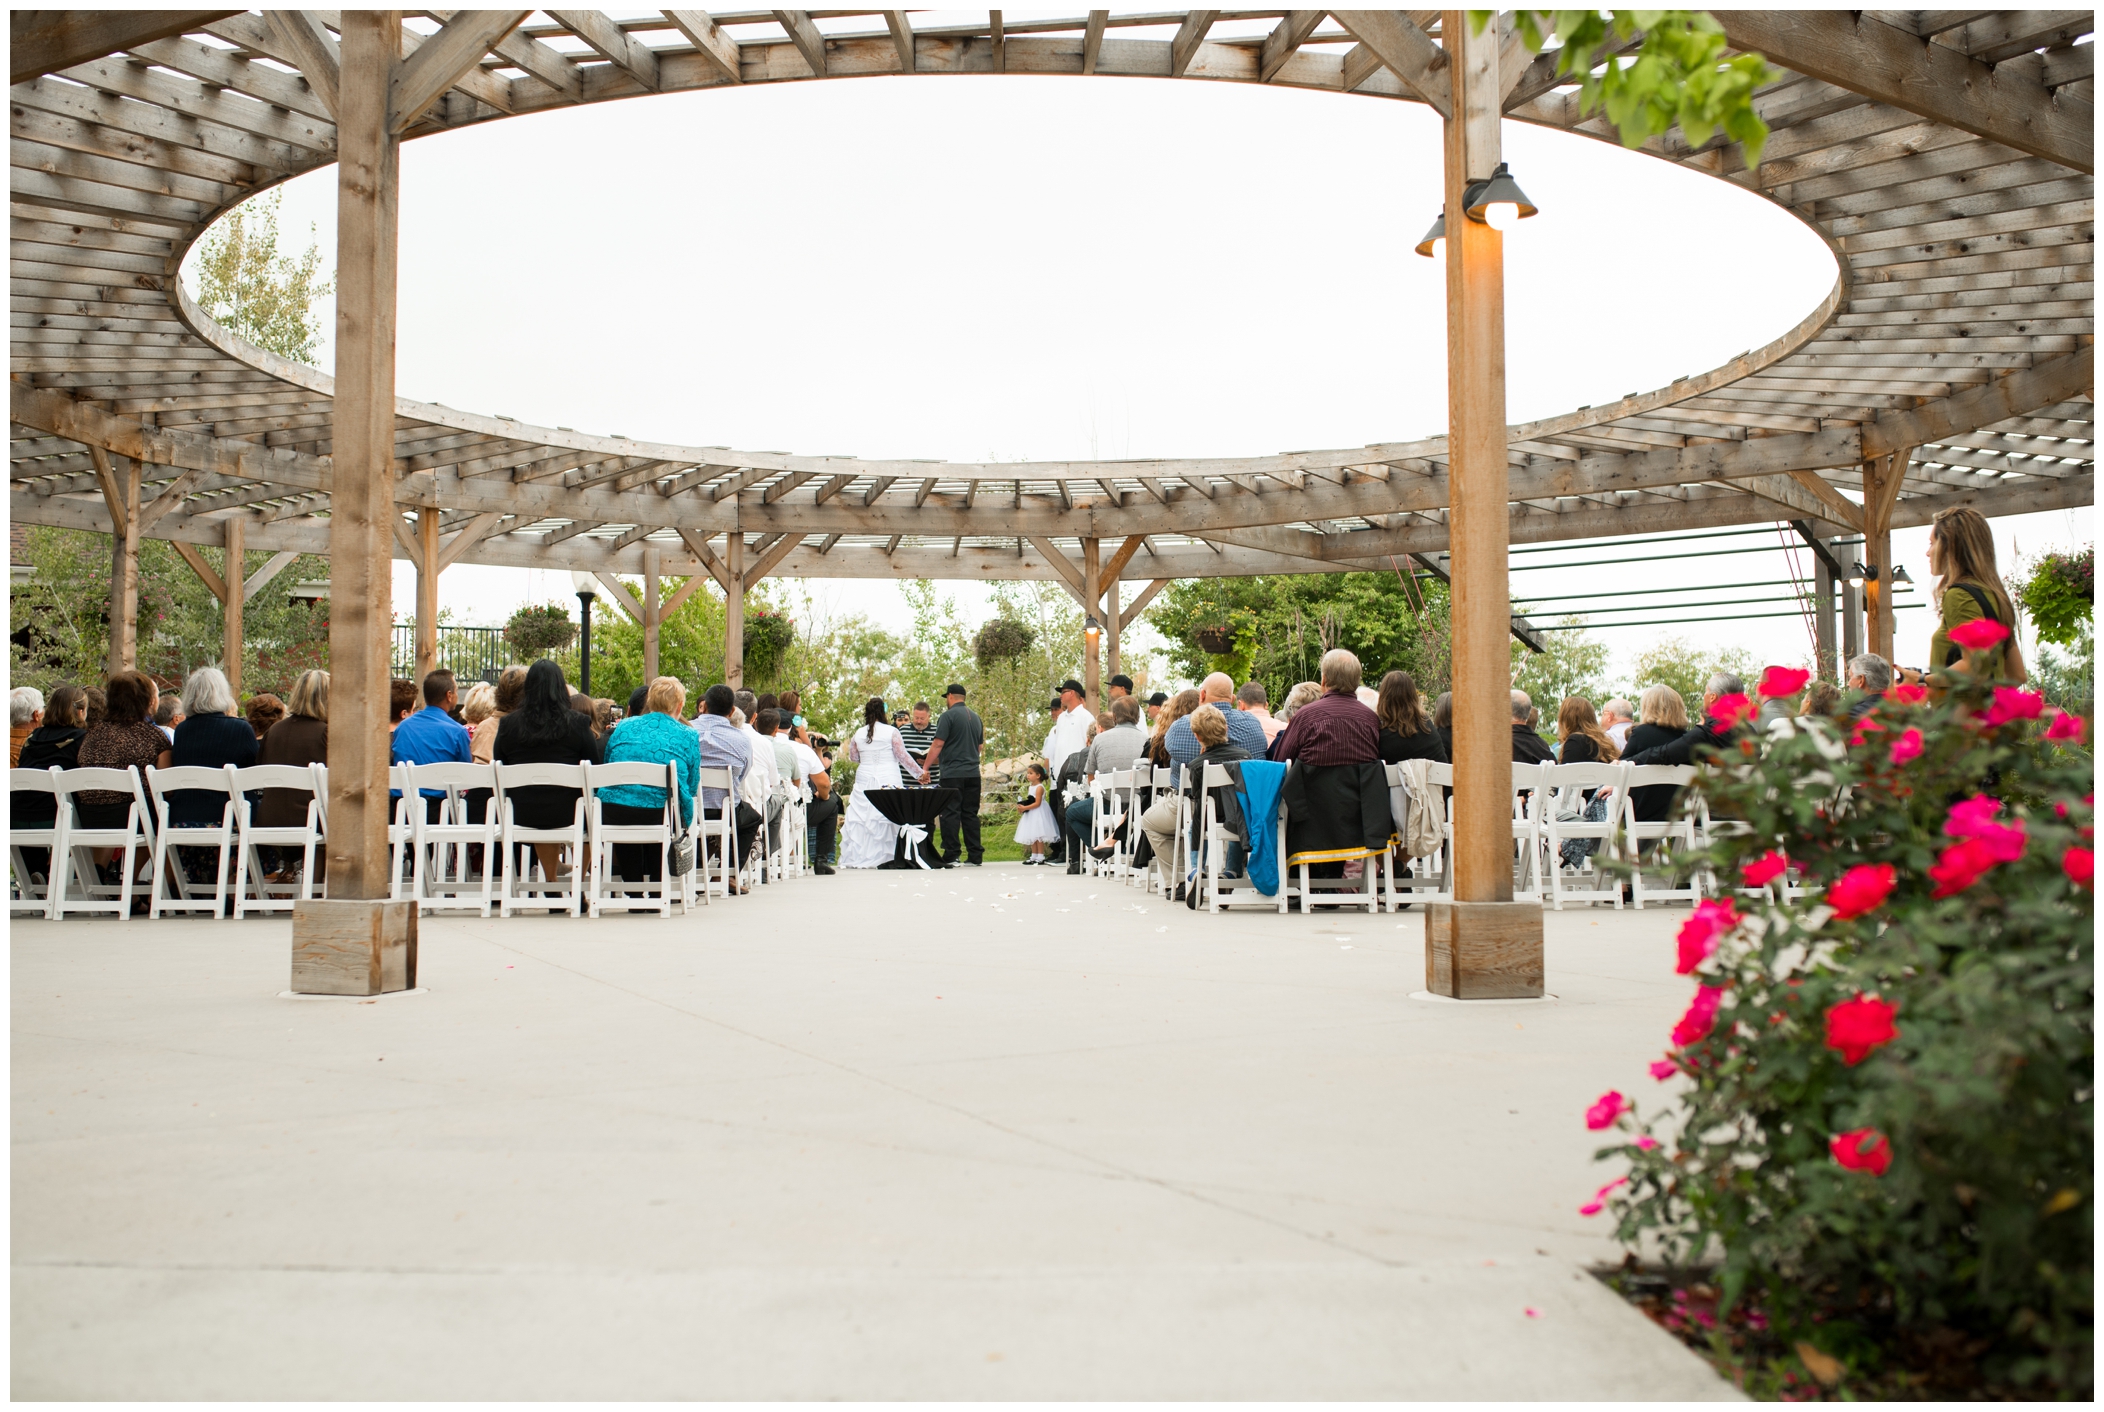 Berthoud wedding photography at Brookside Gardens, by Plum Pretty Photography